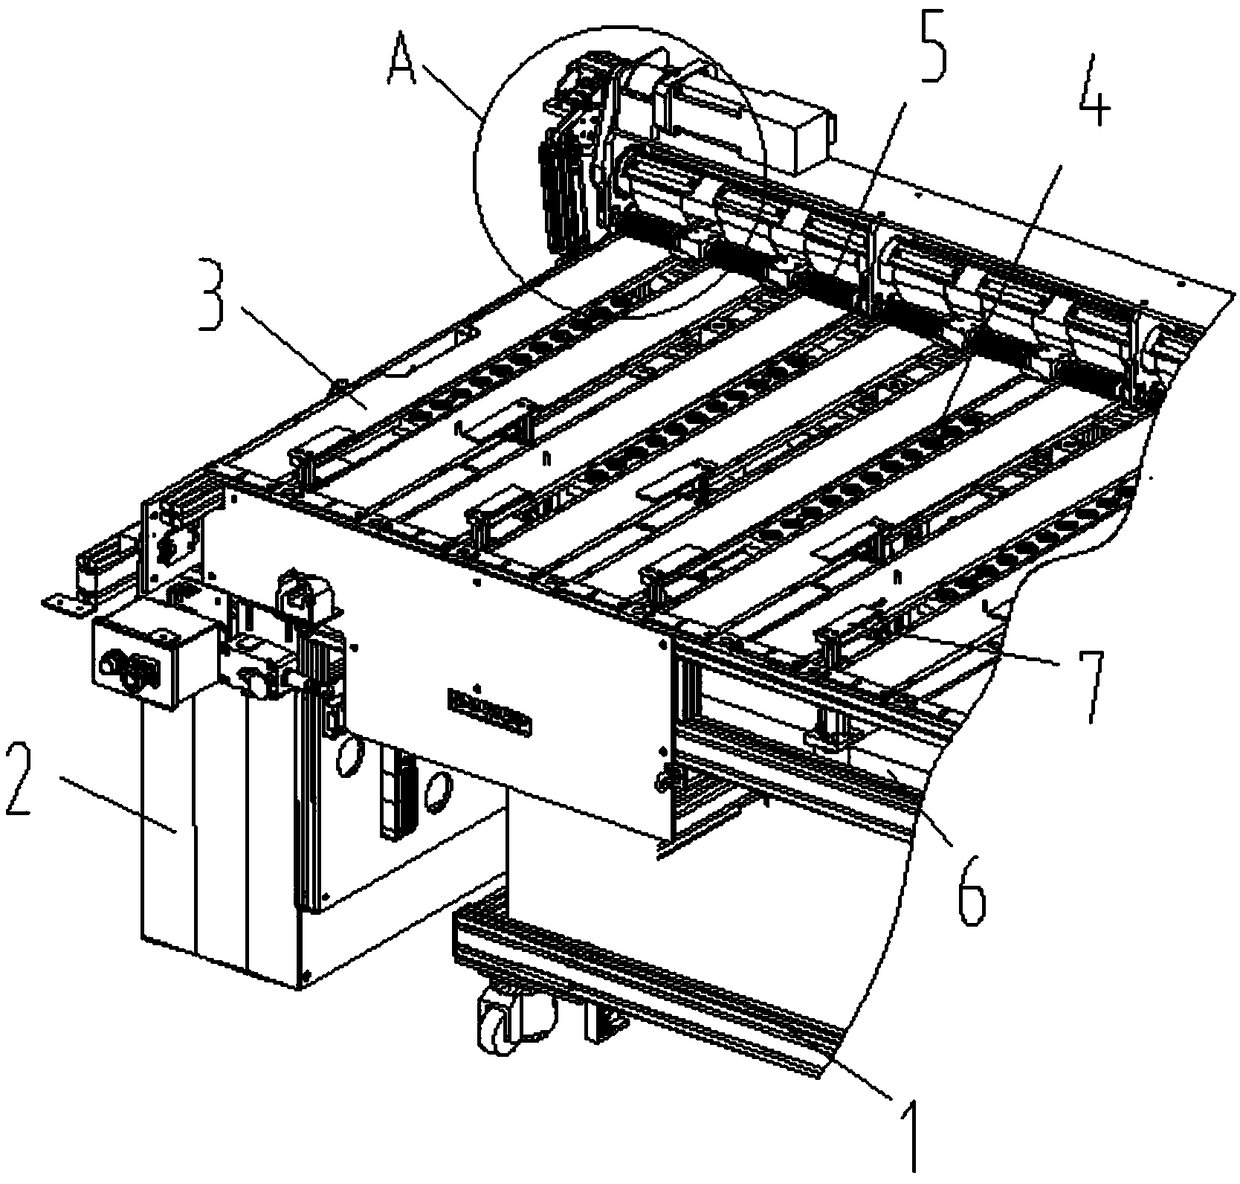 An automatic polishing and chamfering machine for a table